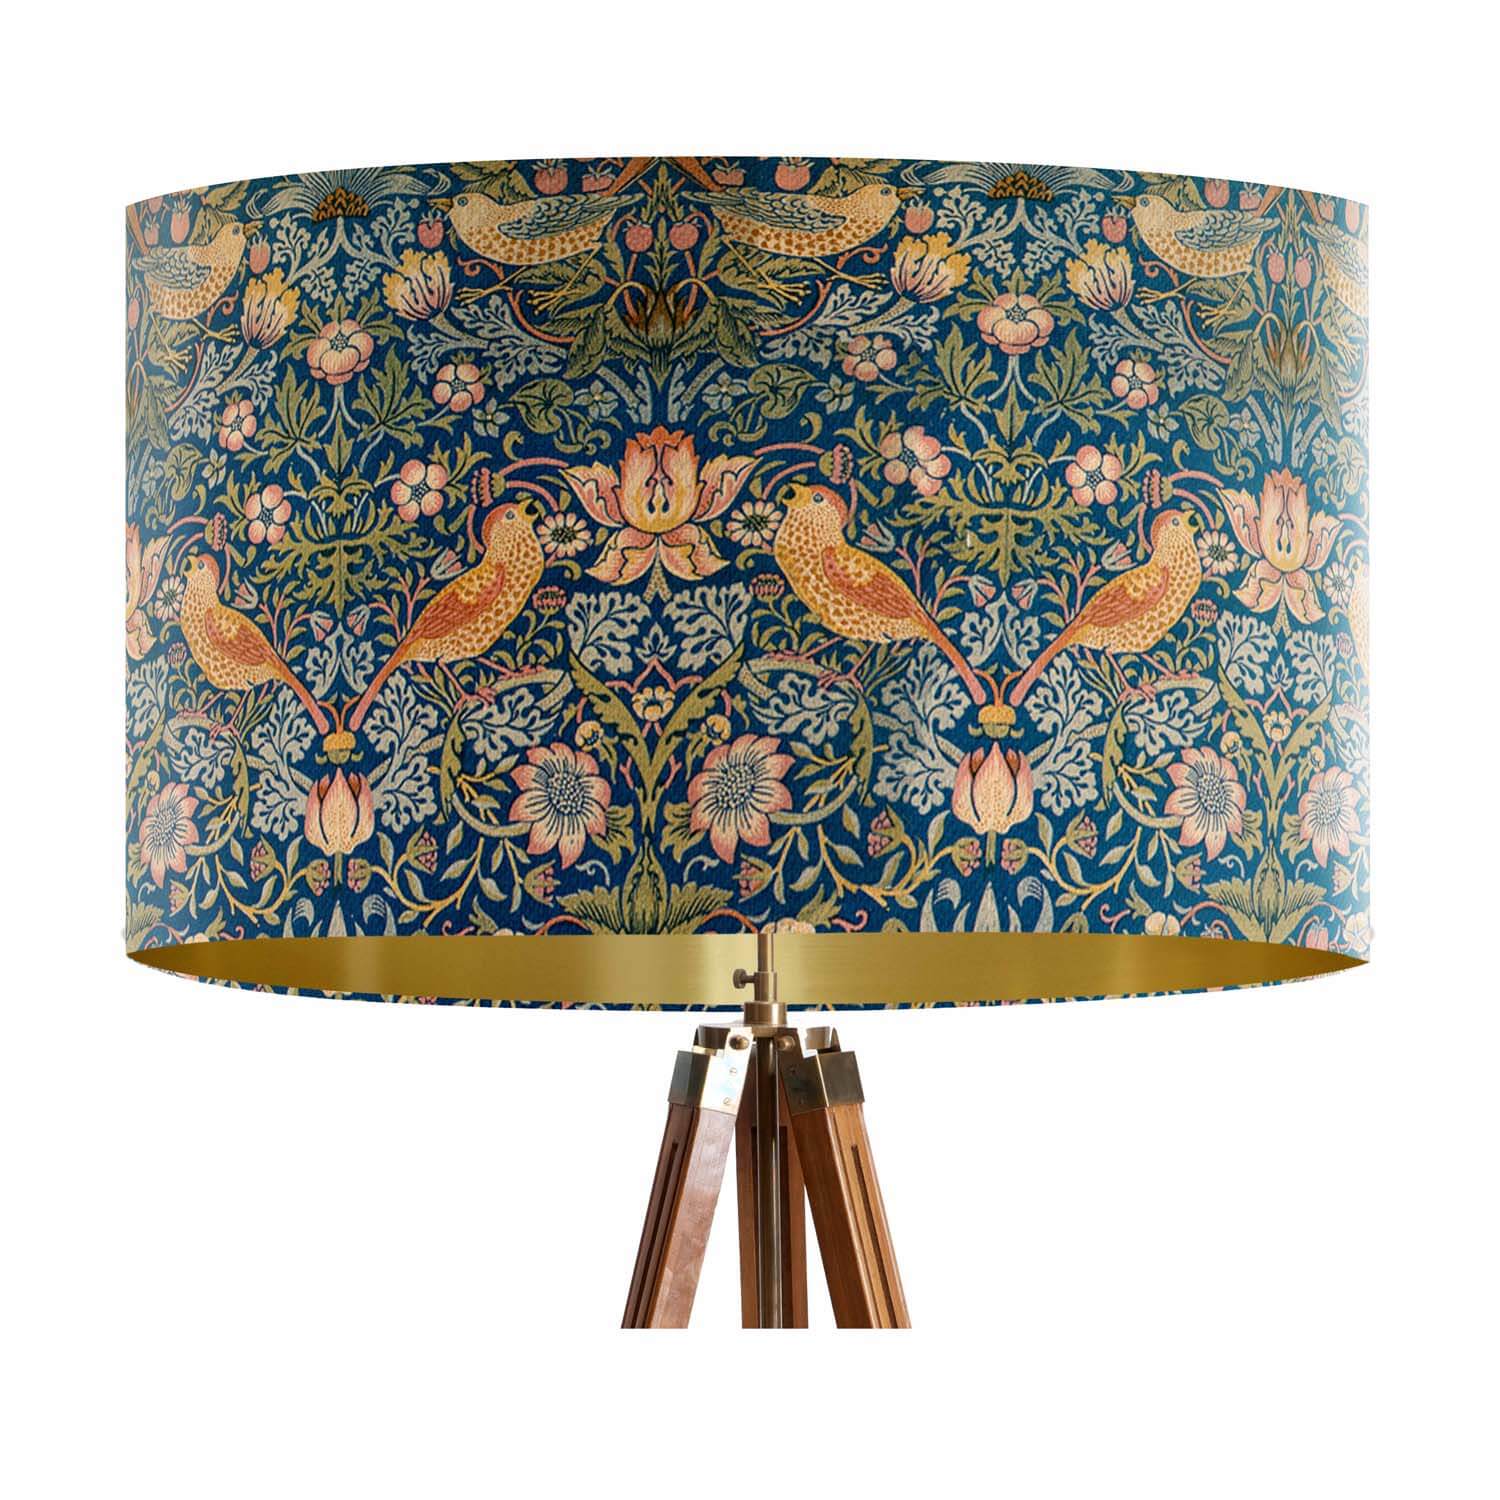 Strawberry Thief Gold - William Morris Gallery Lampshade